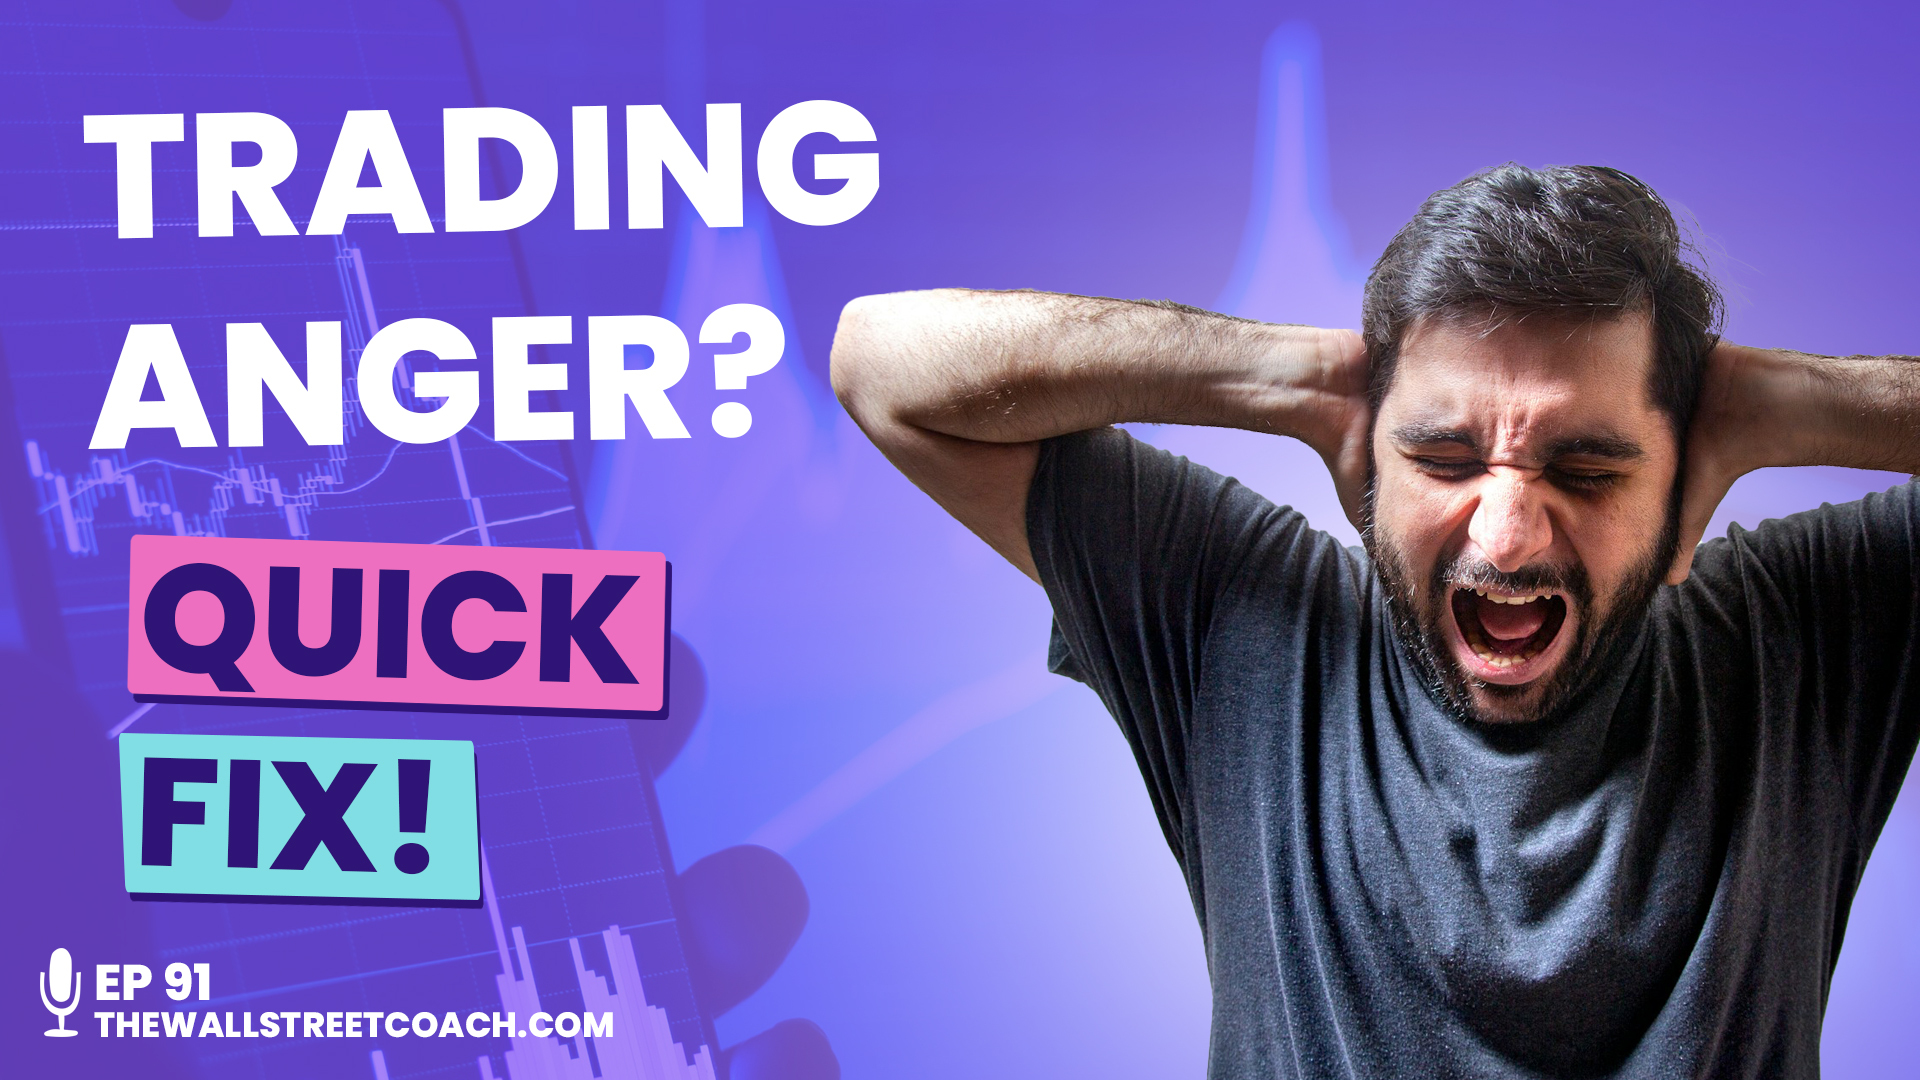 Ep 91:  Angry After Trading? Discover This Quick Anger-Release Trick